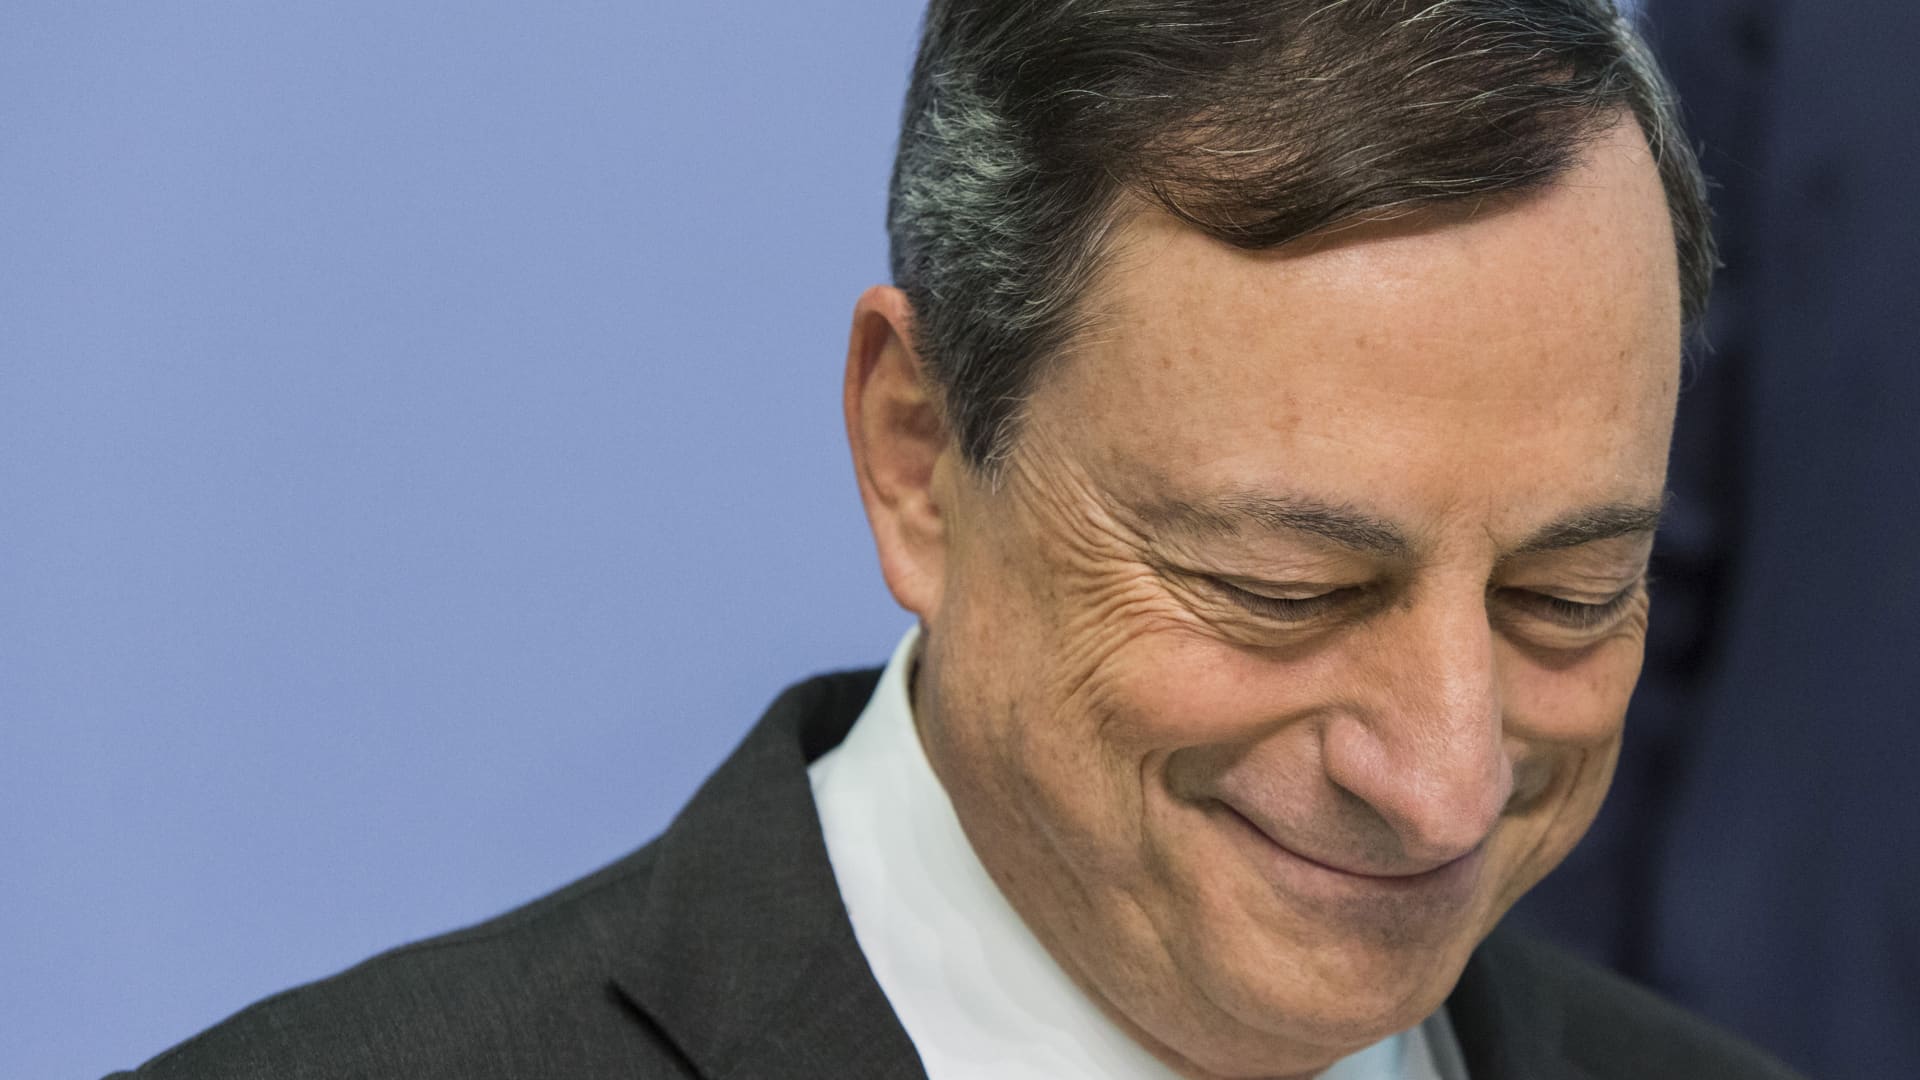 ECB sends a dovish message after rattling markets with 'taper' talk